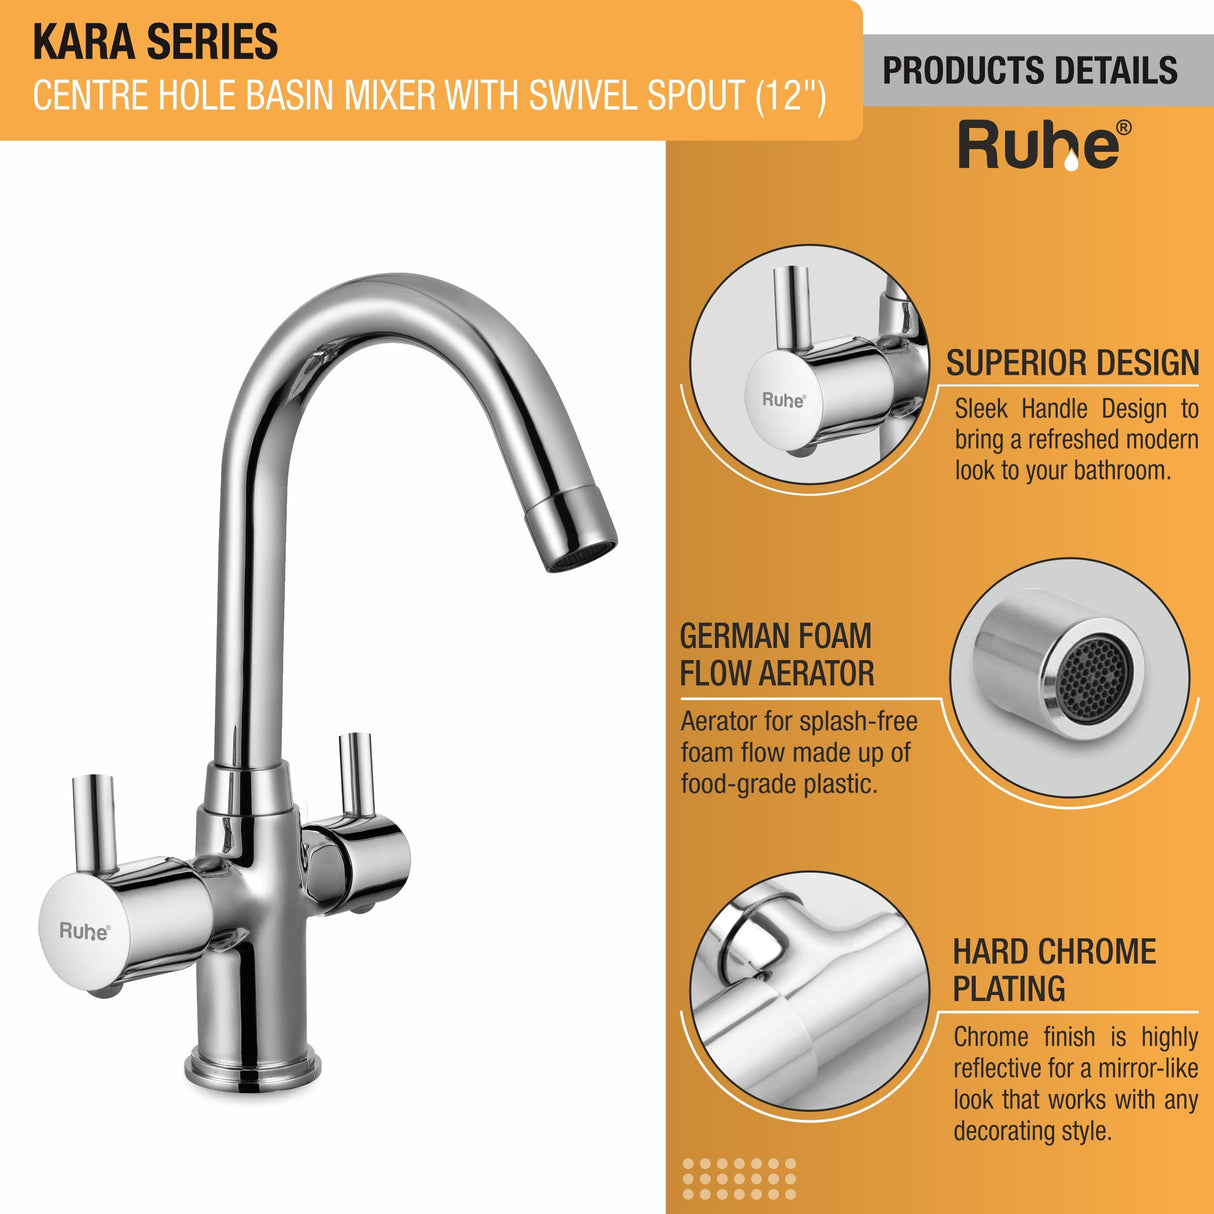 Kara Centre Hole Basin Mixer Brass Faucet with Small (12 inches) Round Swivel Spout product details with superior design, foam flow aerator, chrome plating